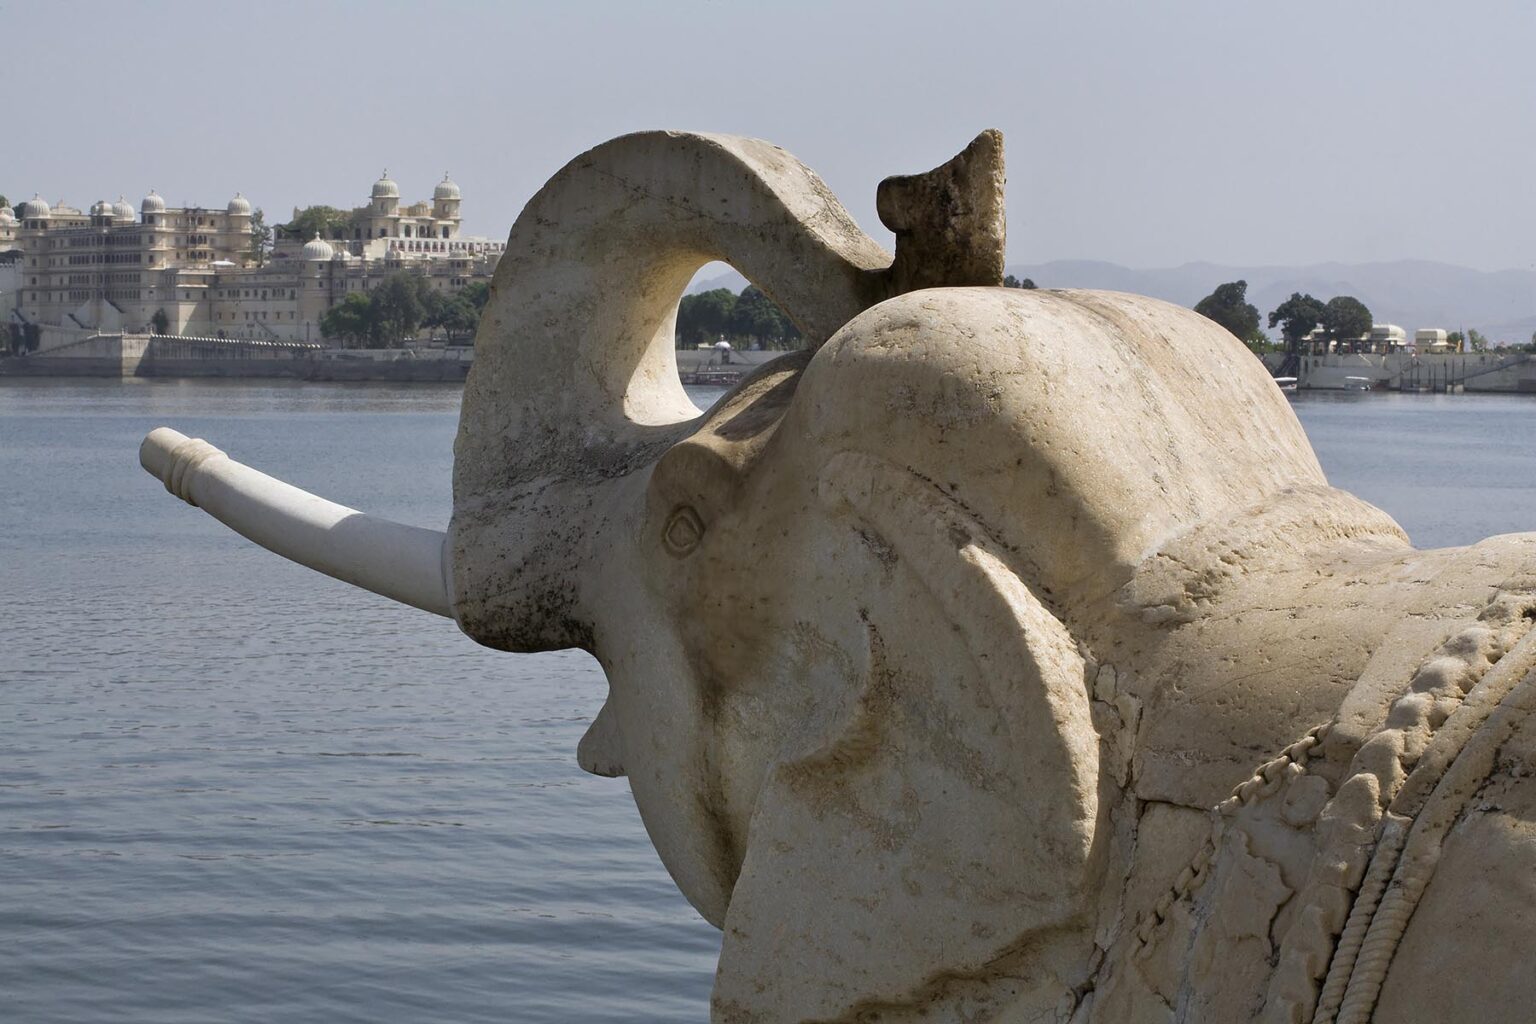 A STONE CARVED ELEPHANT guards the palace on JAGMANDIR ISLAND in LAKE PICHOLA which was built in 1620 AD by Maharaja Karan Singh - UDAIPUR, RAJASTHAN, INDIA